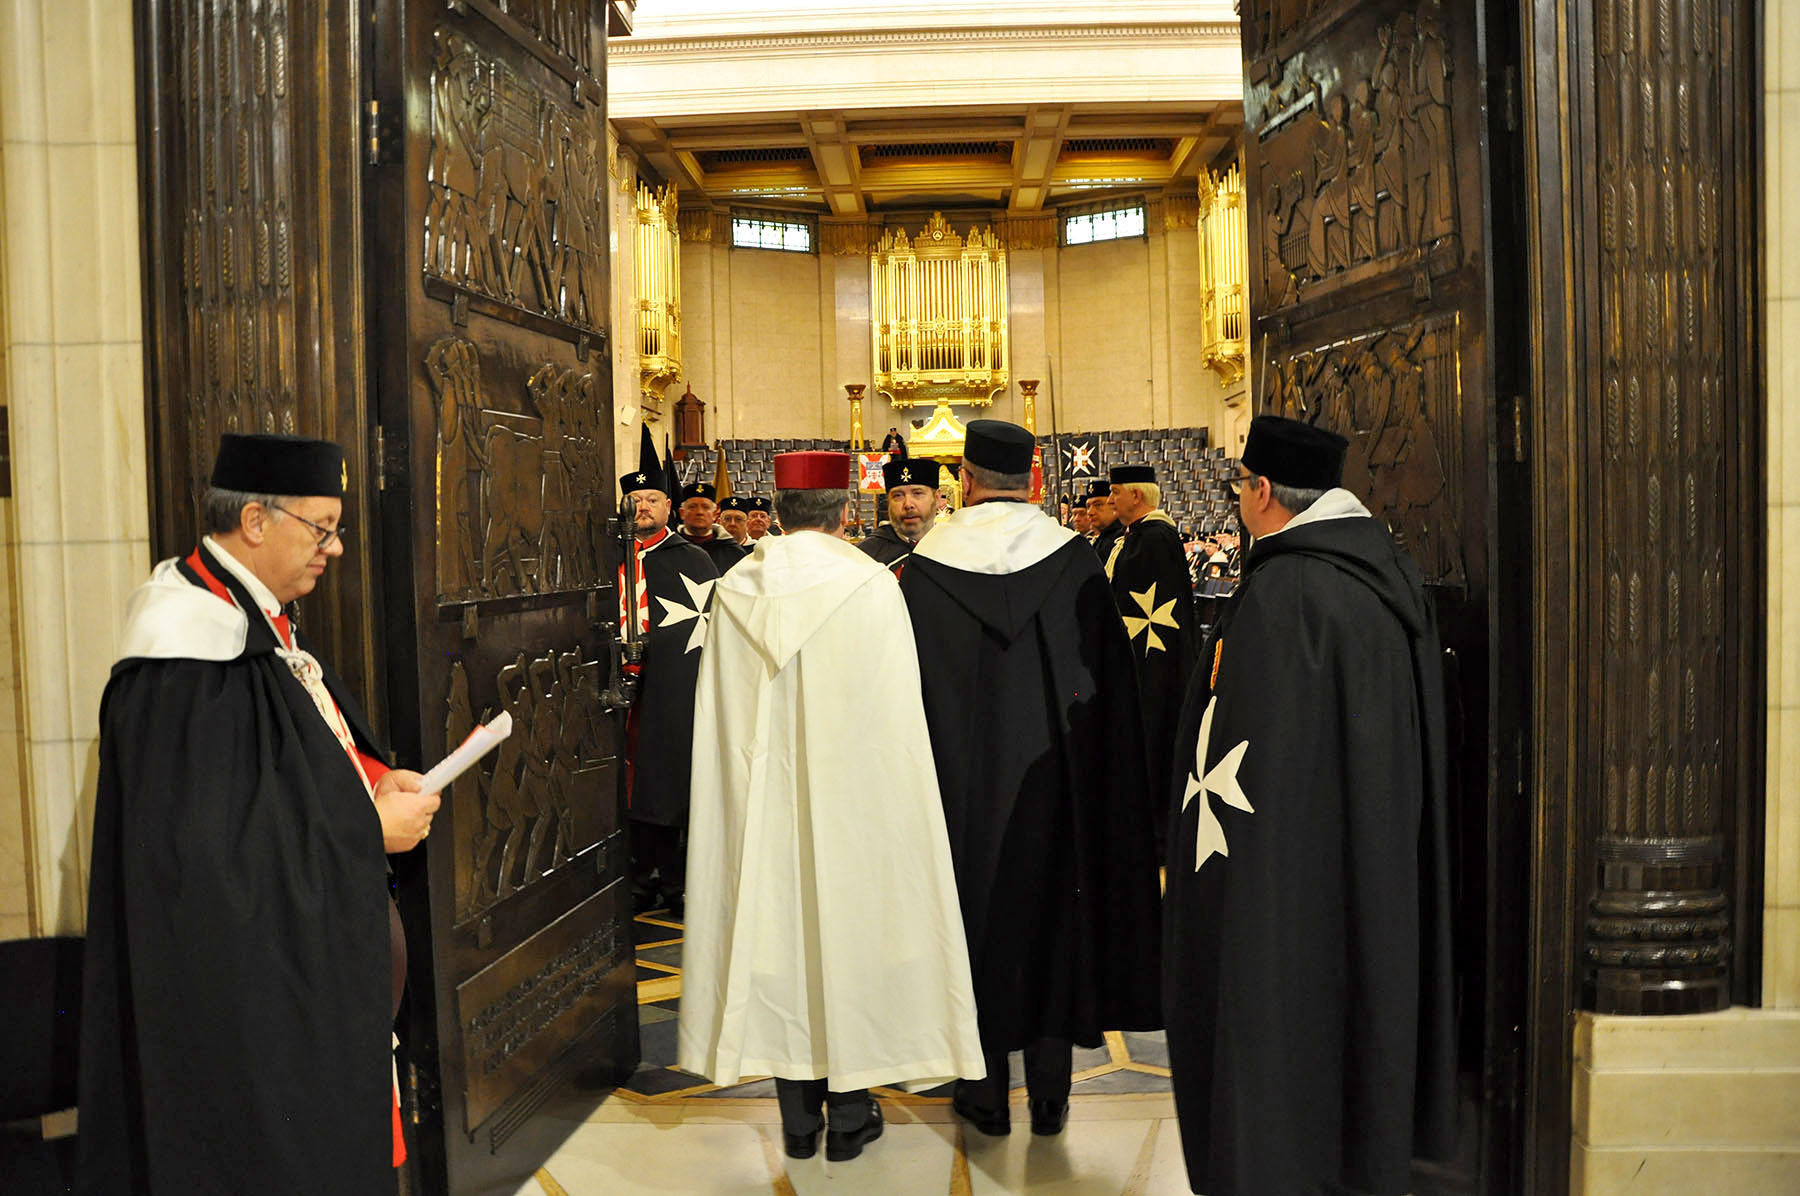 The Annual Meeting of the Great Priory of Malta